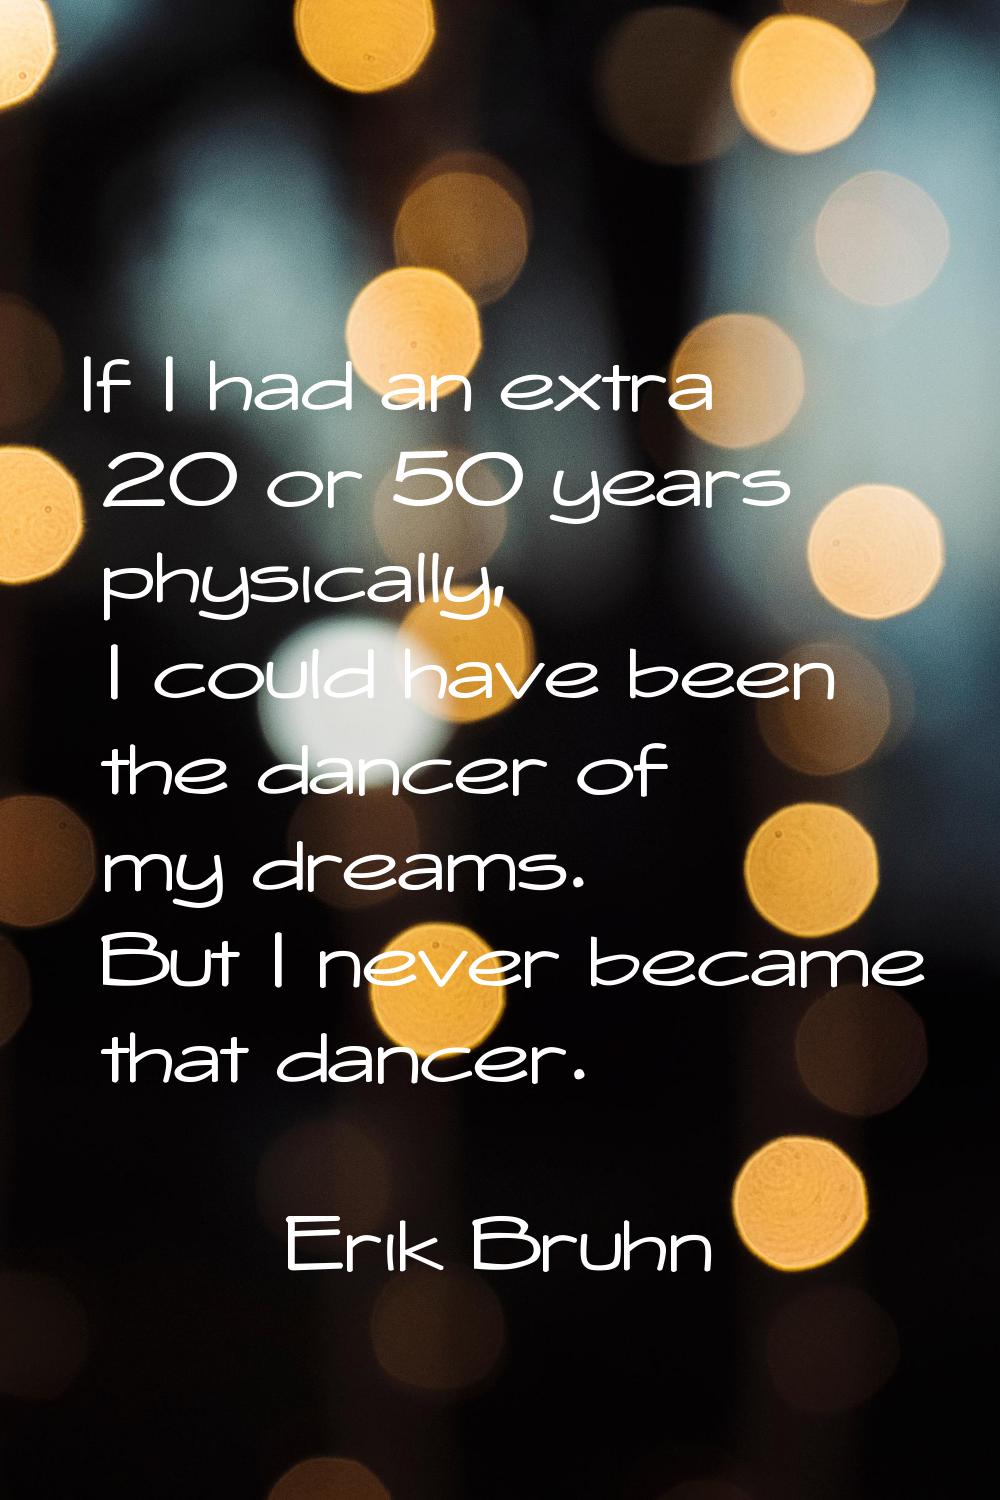 If I had an extra 20 or 50 years physically, I could have been the dancer of my dreams. But I never